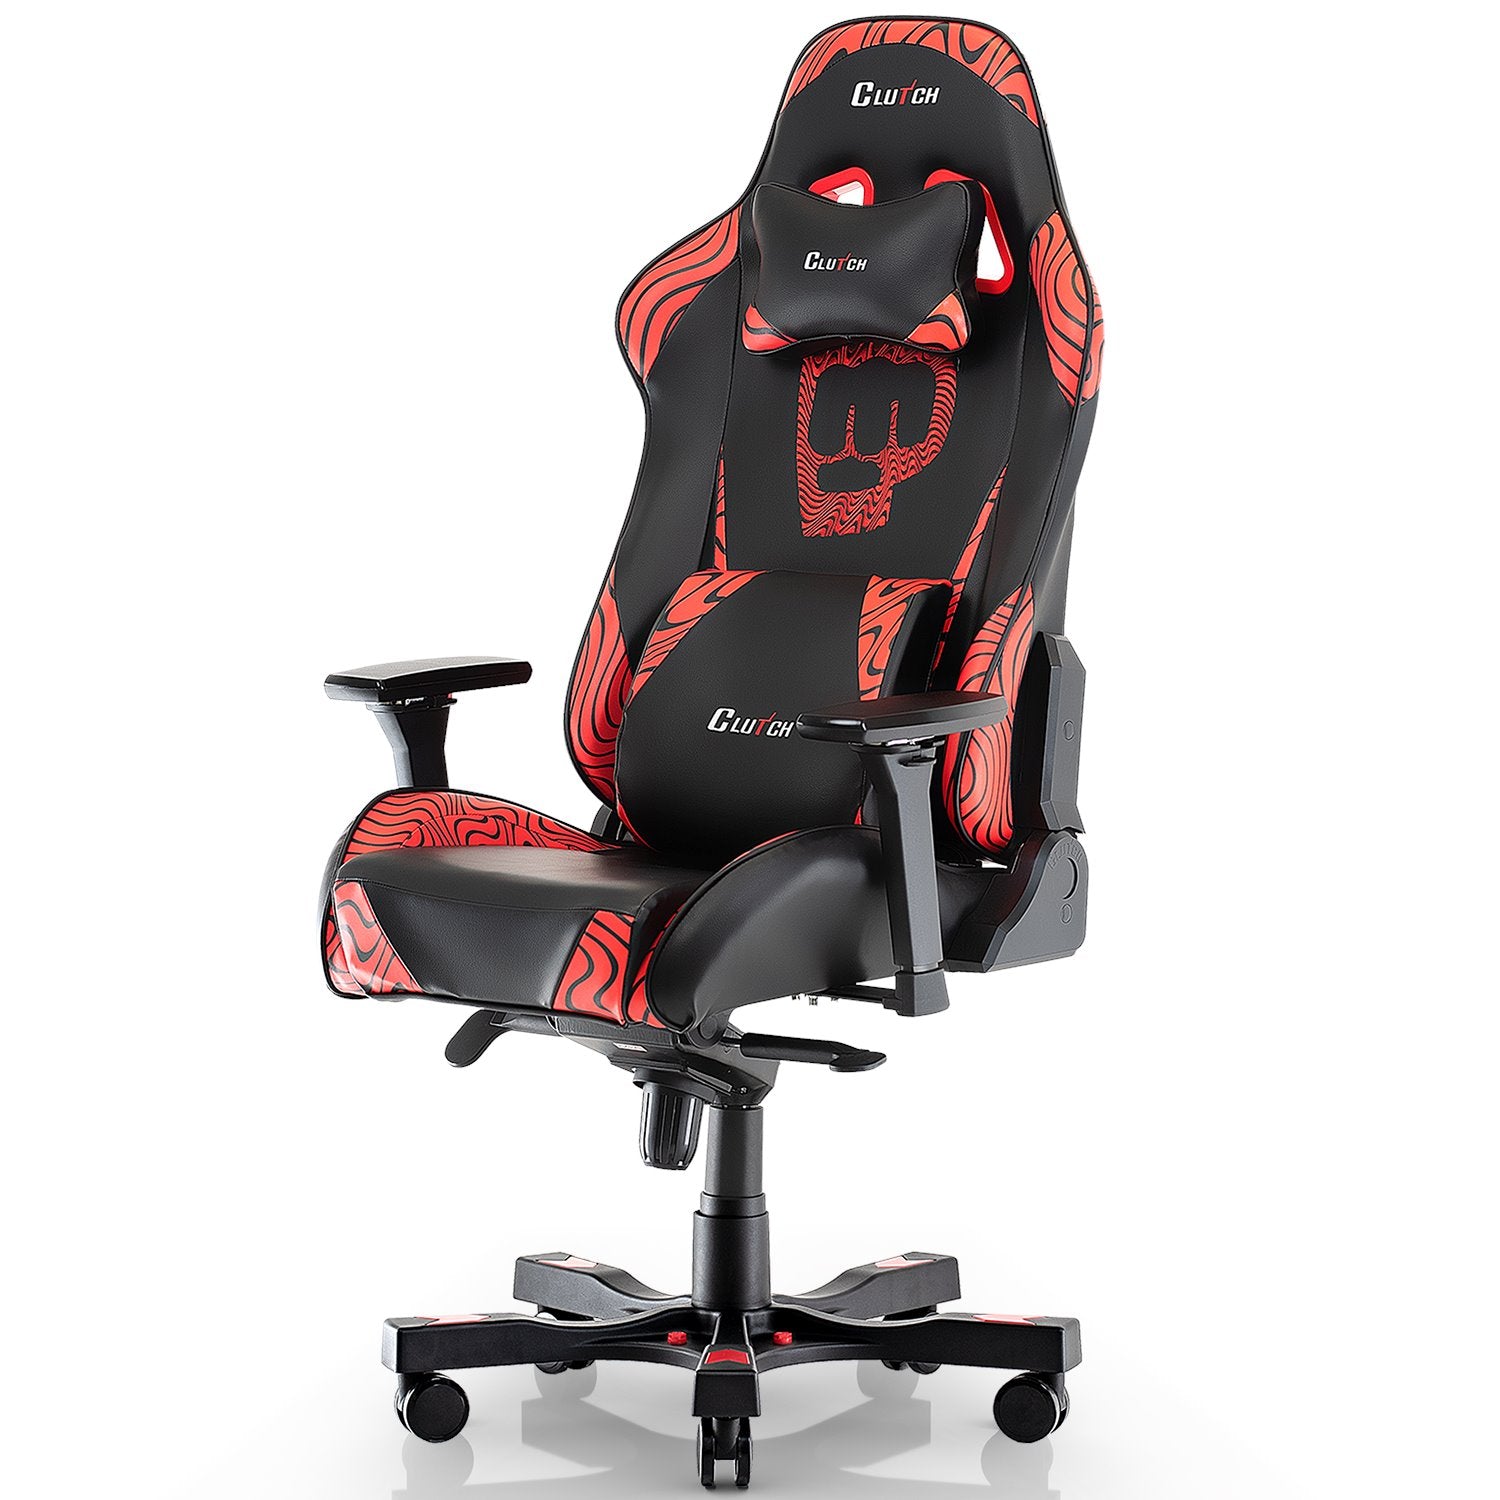 Pewdiepie Edition - Throttle Series Red Gaming Chair